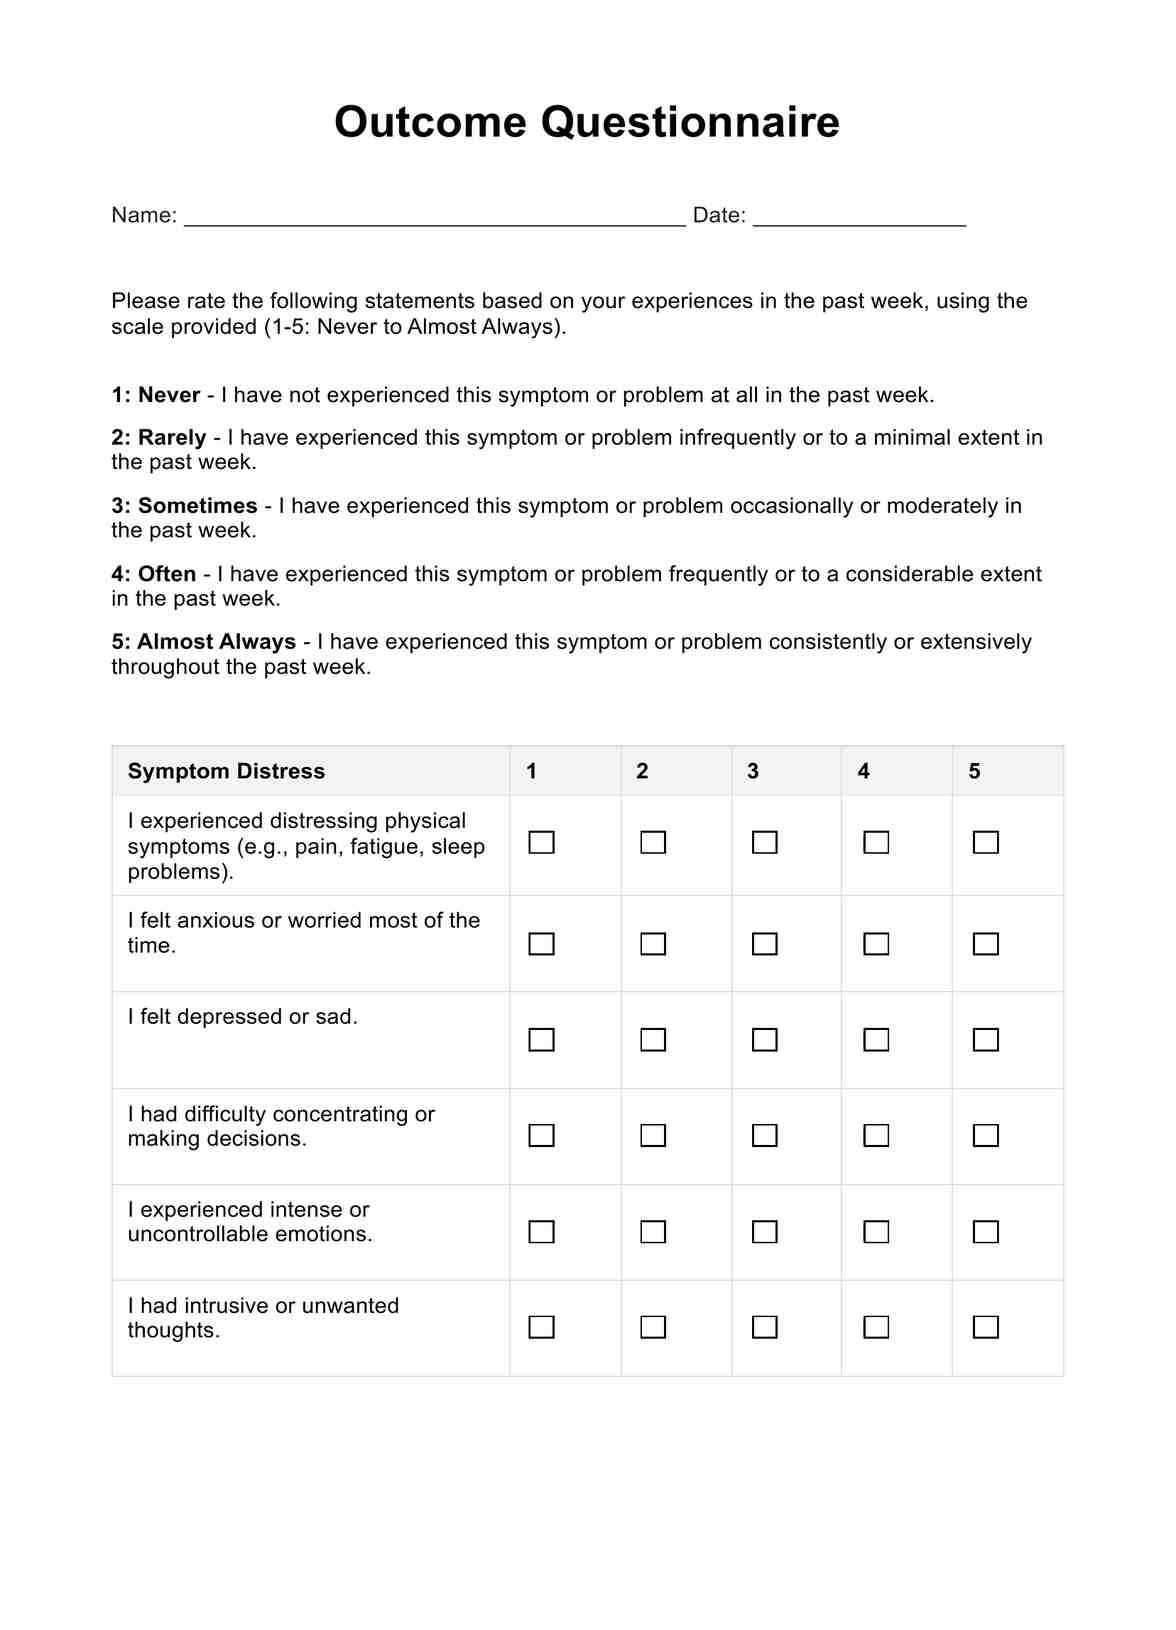 Outcome Questionnaire PDF Example